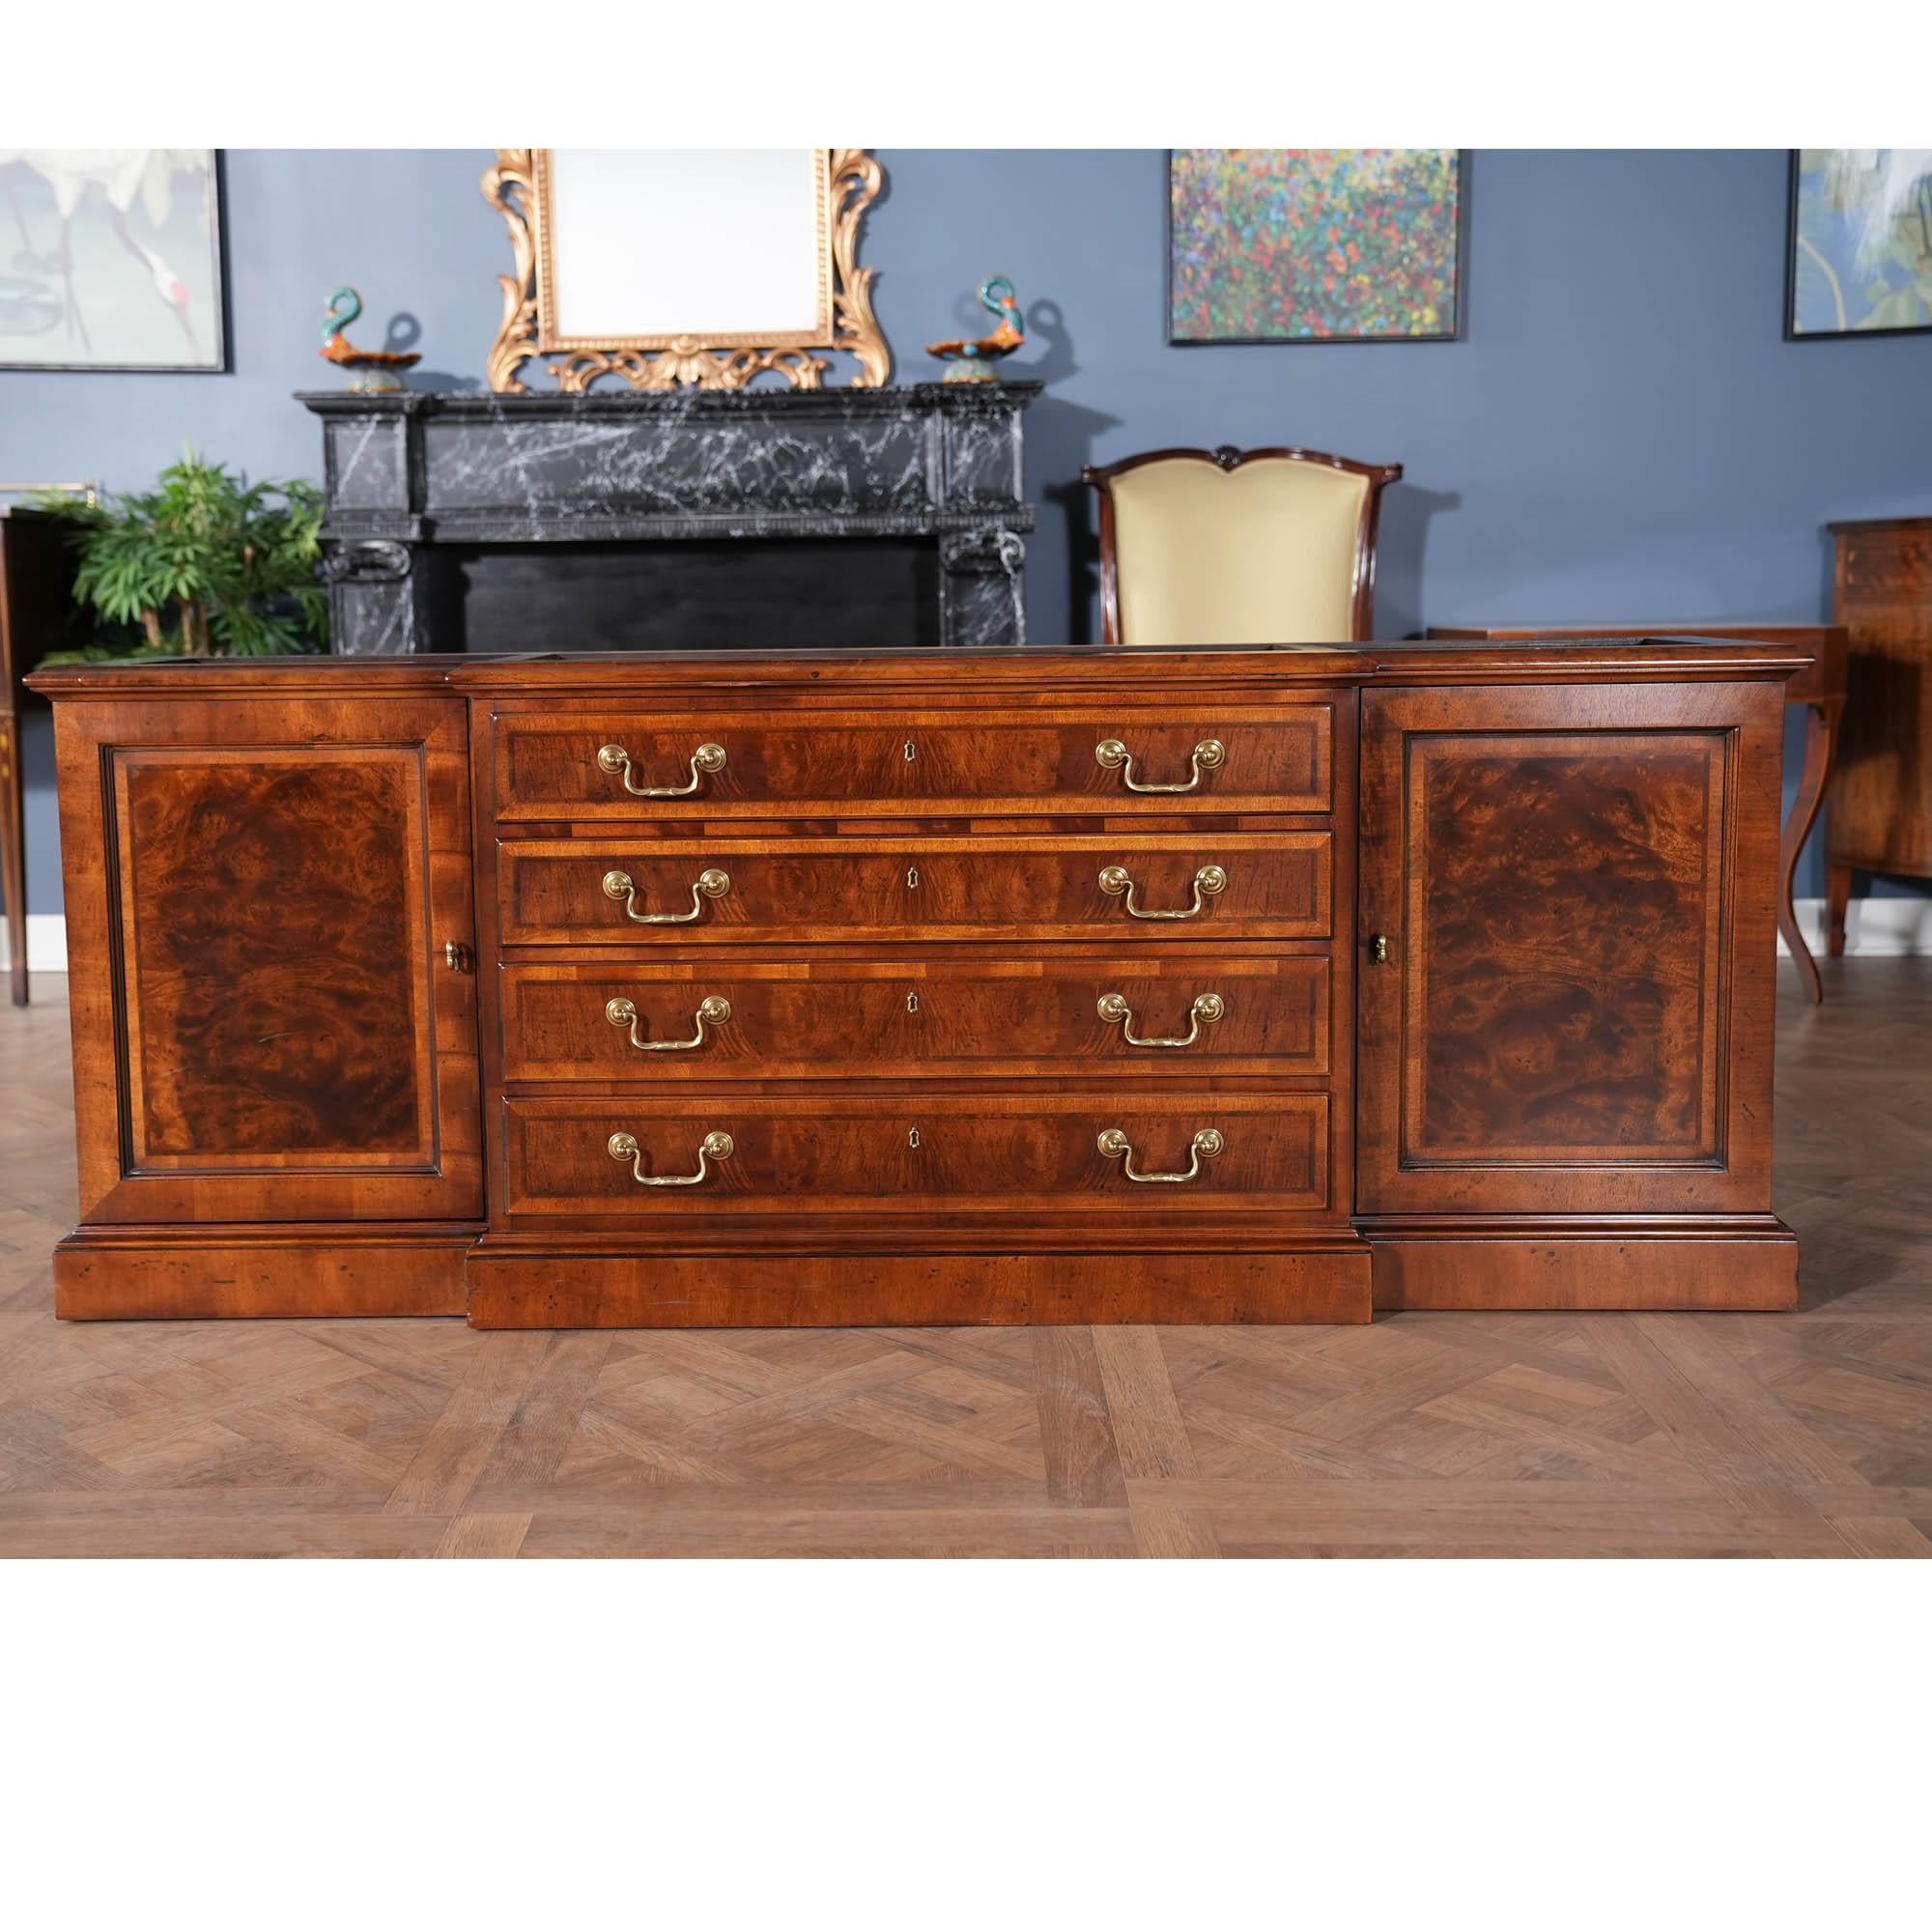 From Niagara Furniture a Henredon Vintage Breakfront in excellent, ready to use in your home, condition.

Simple yet sophisticated this beautiful Henredon Vintage Breakfront has everything going for it. This two piece breakfront boasts a nice amount